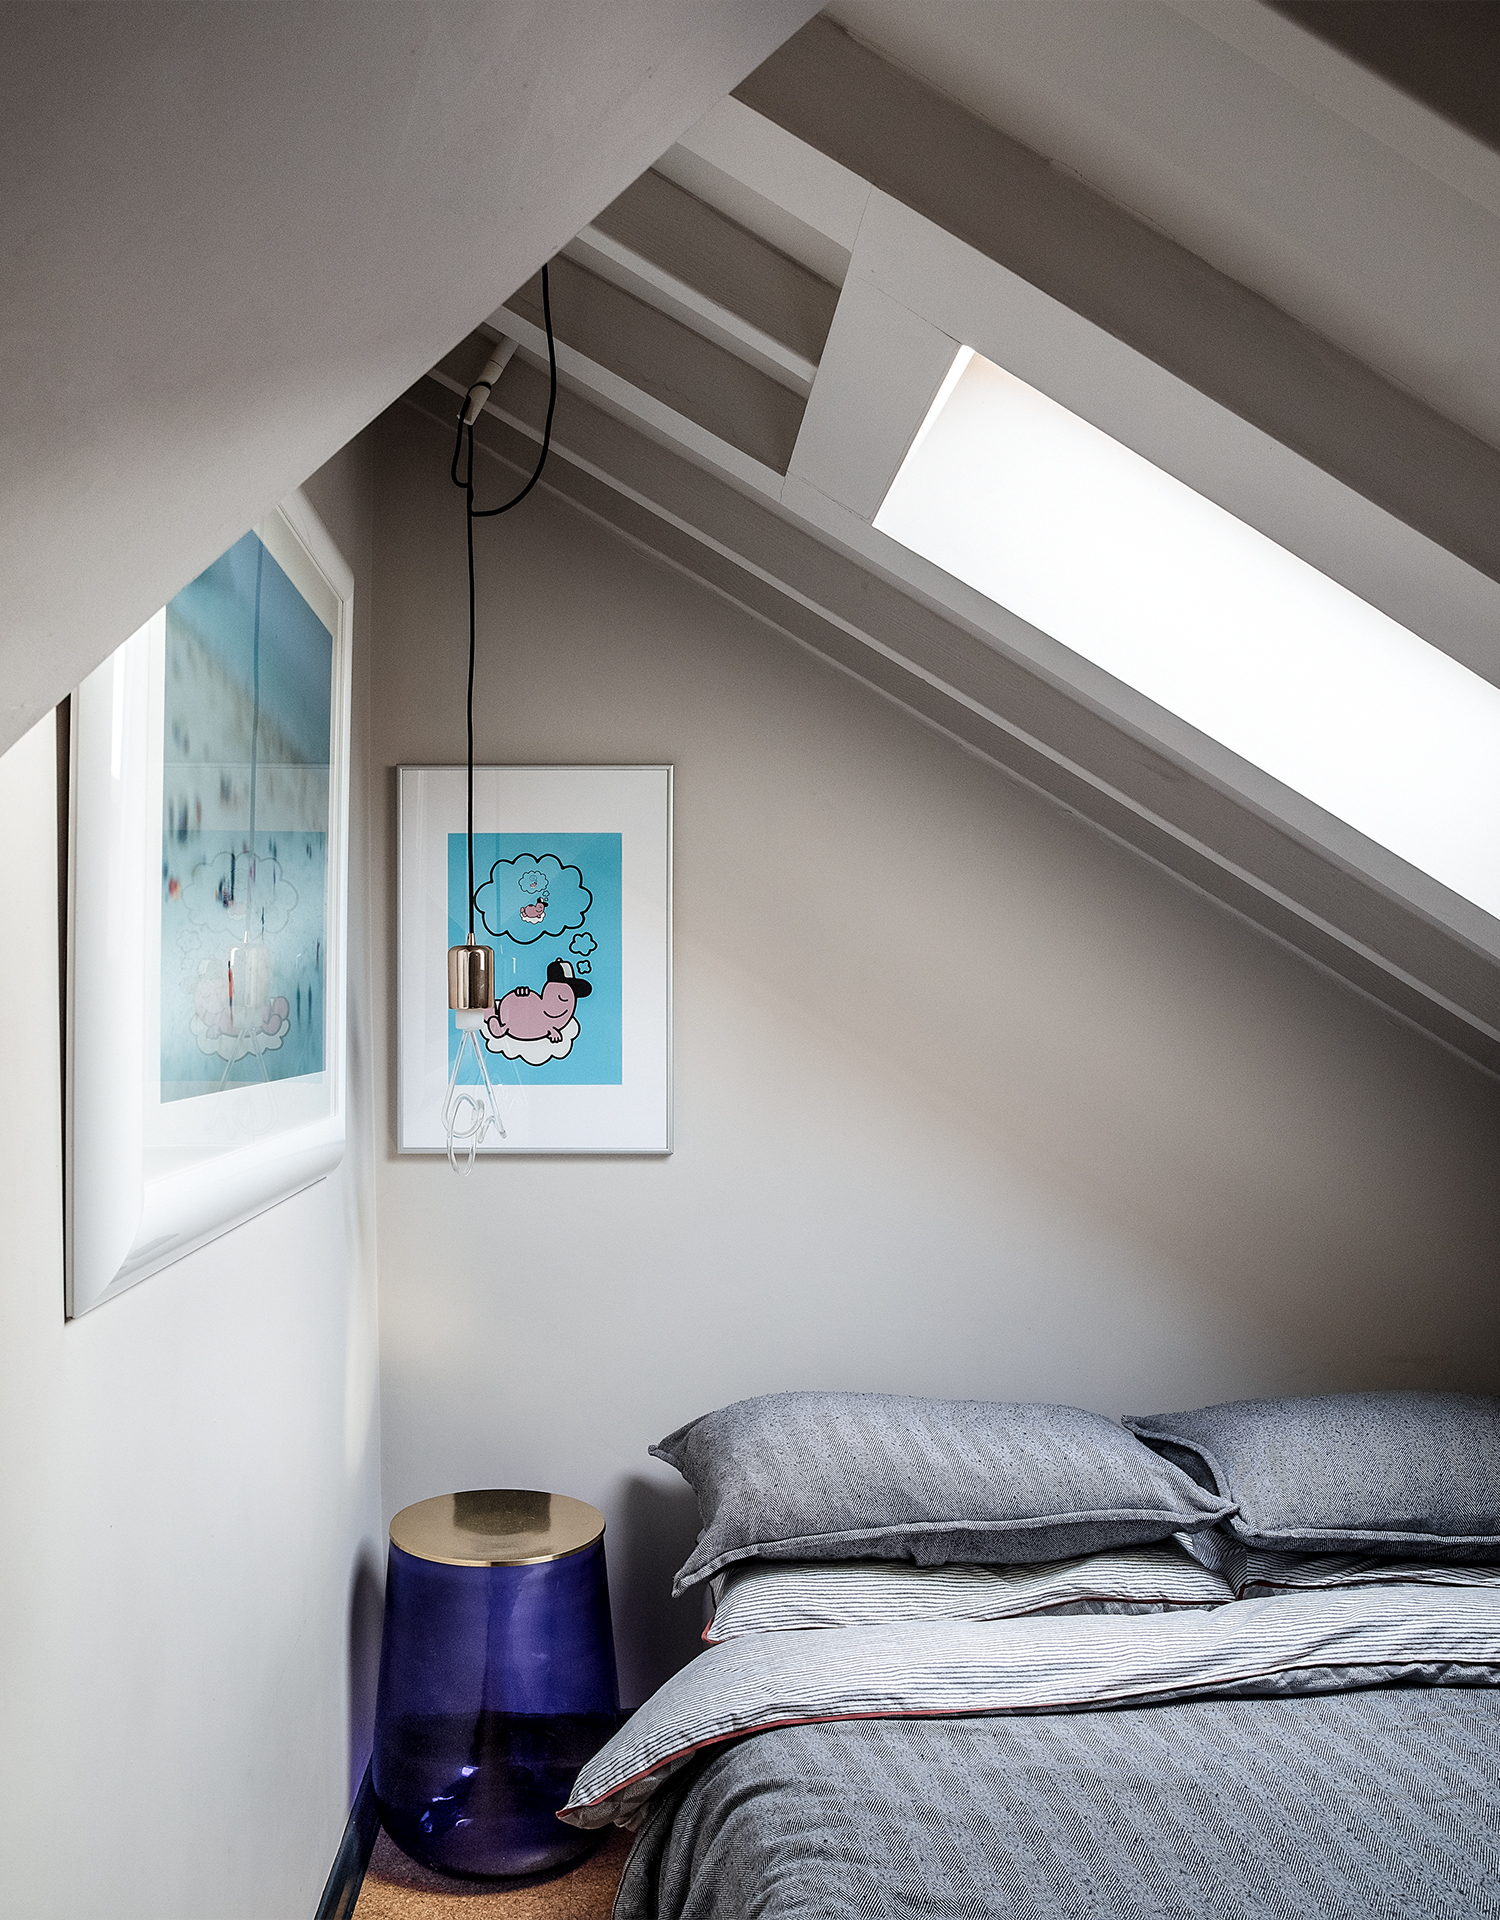 Brixton | Bedroom in a Roof Space | Angel O'Donnell